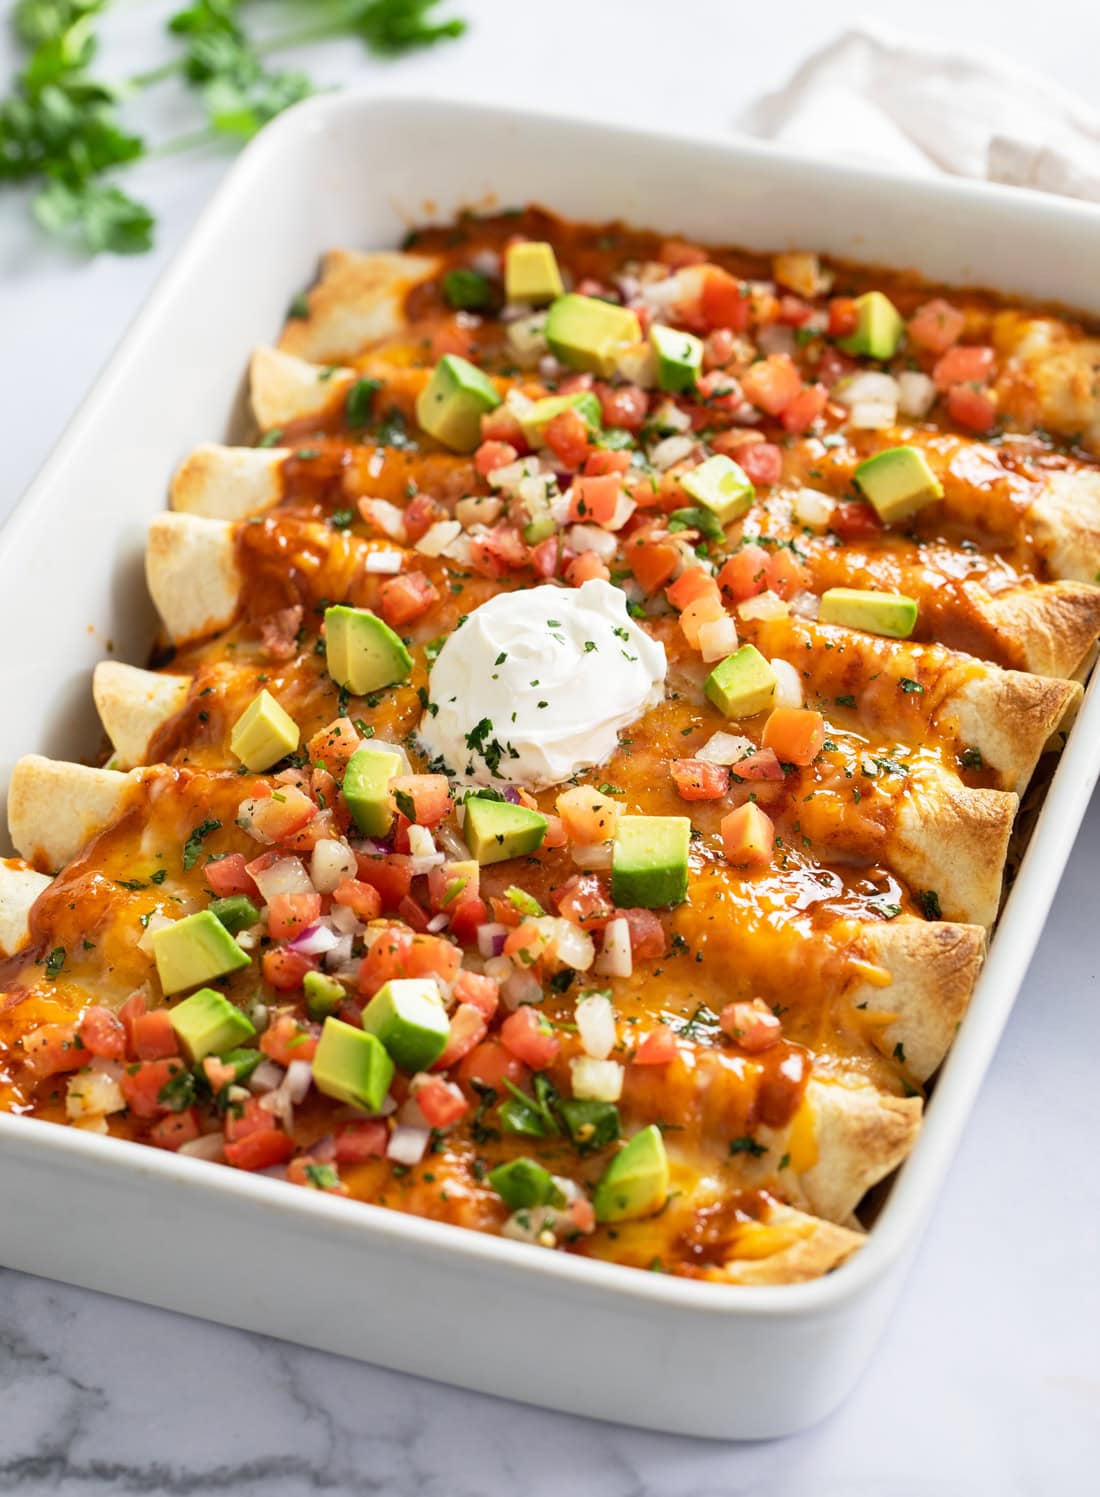 A white casserole dish filled with beef enchiladas with tomatoes, avocados, and sour cream on top.